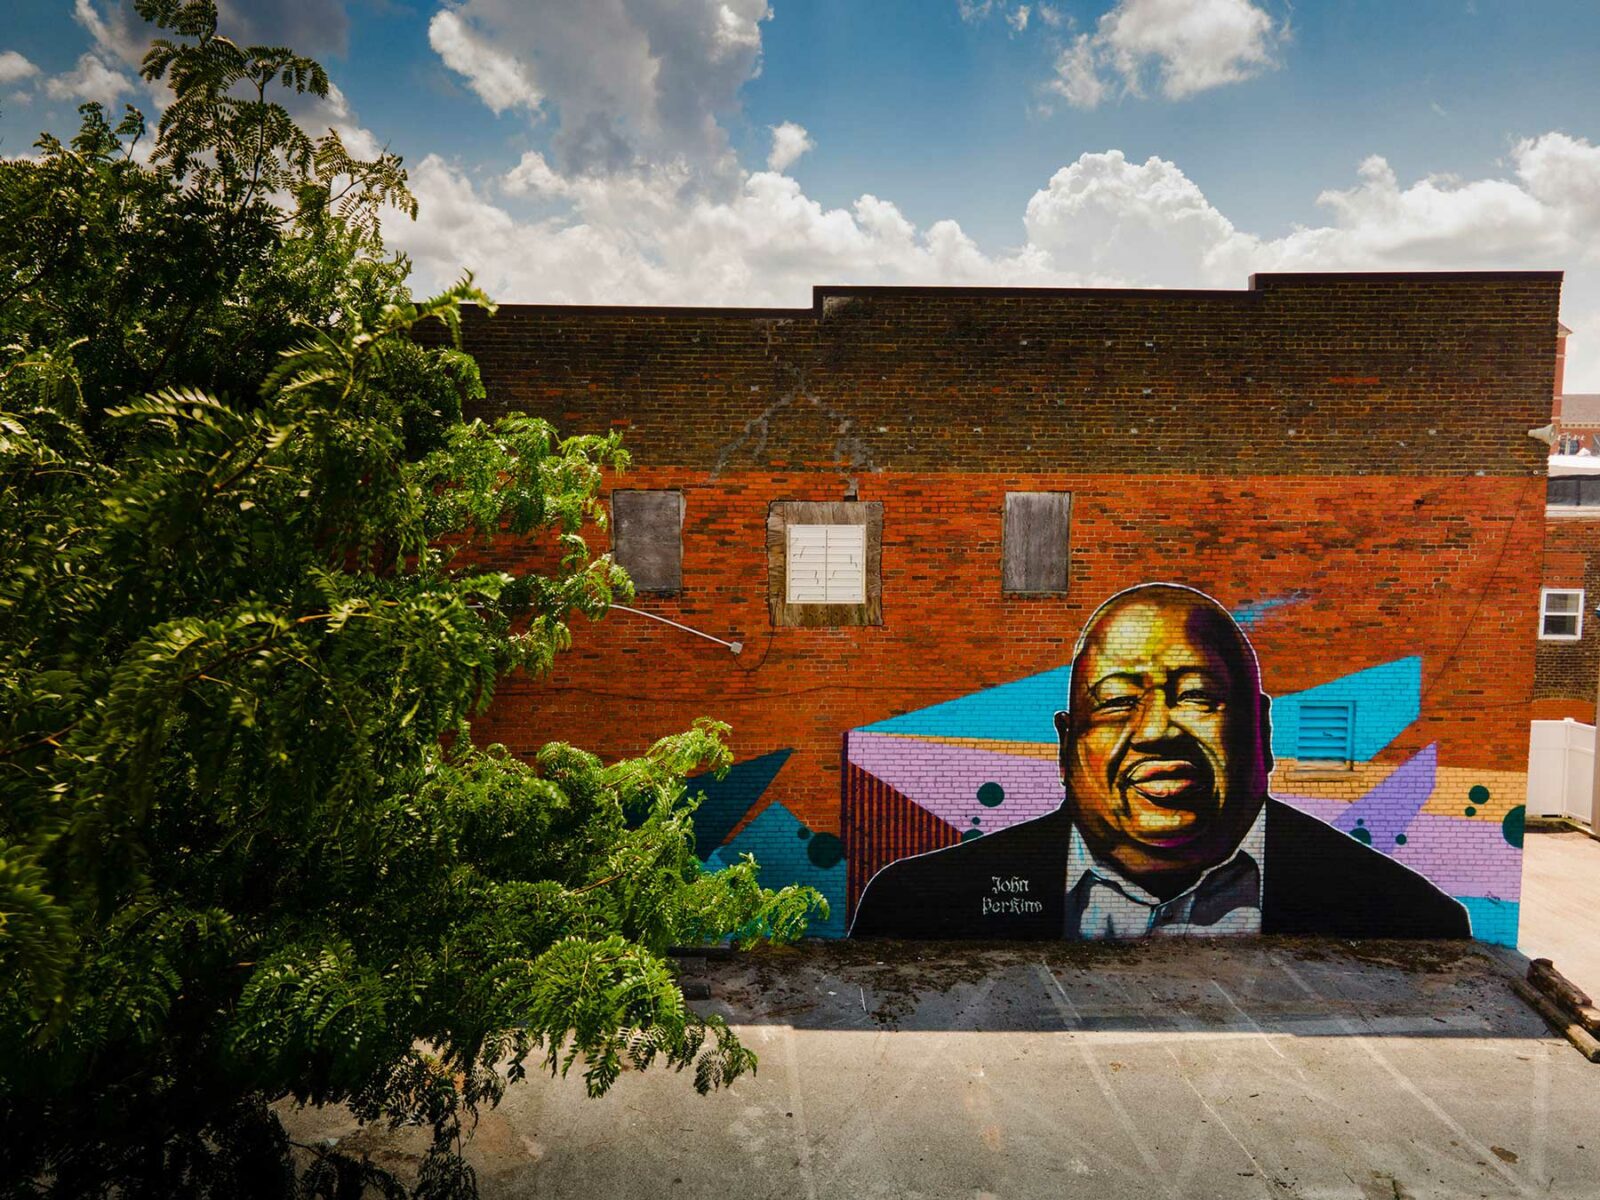 Brick building with large mural portrait of a man.